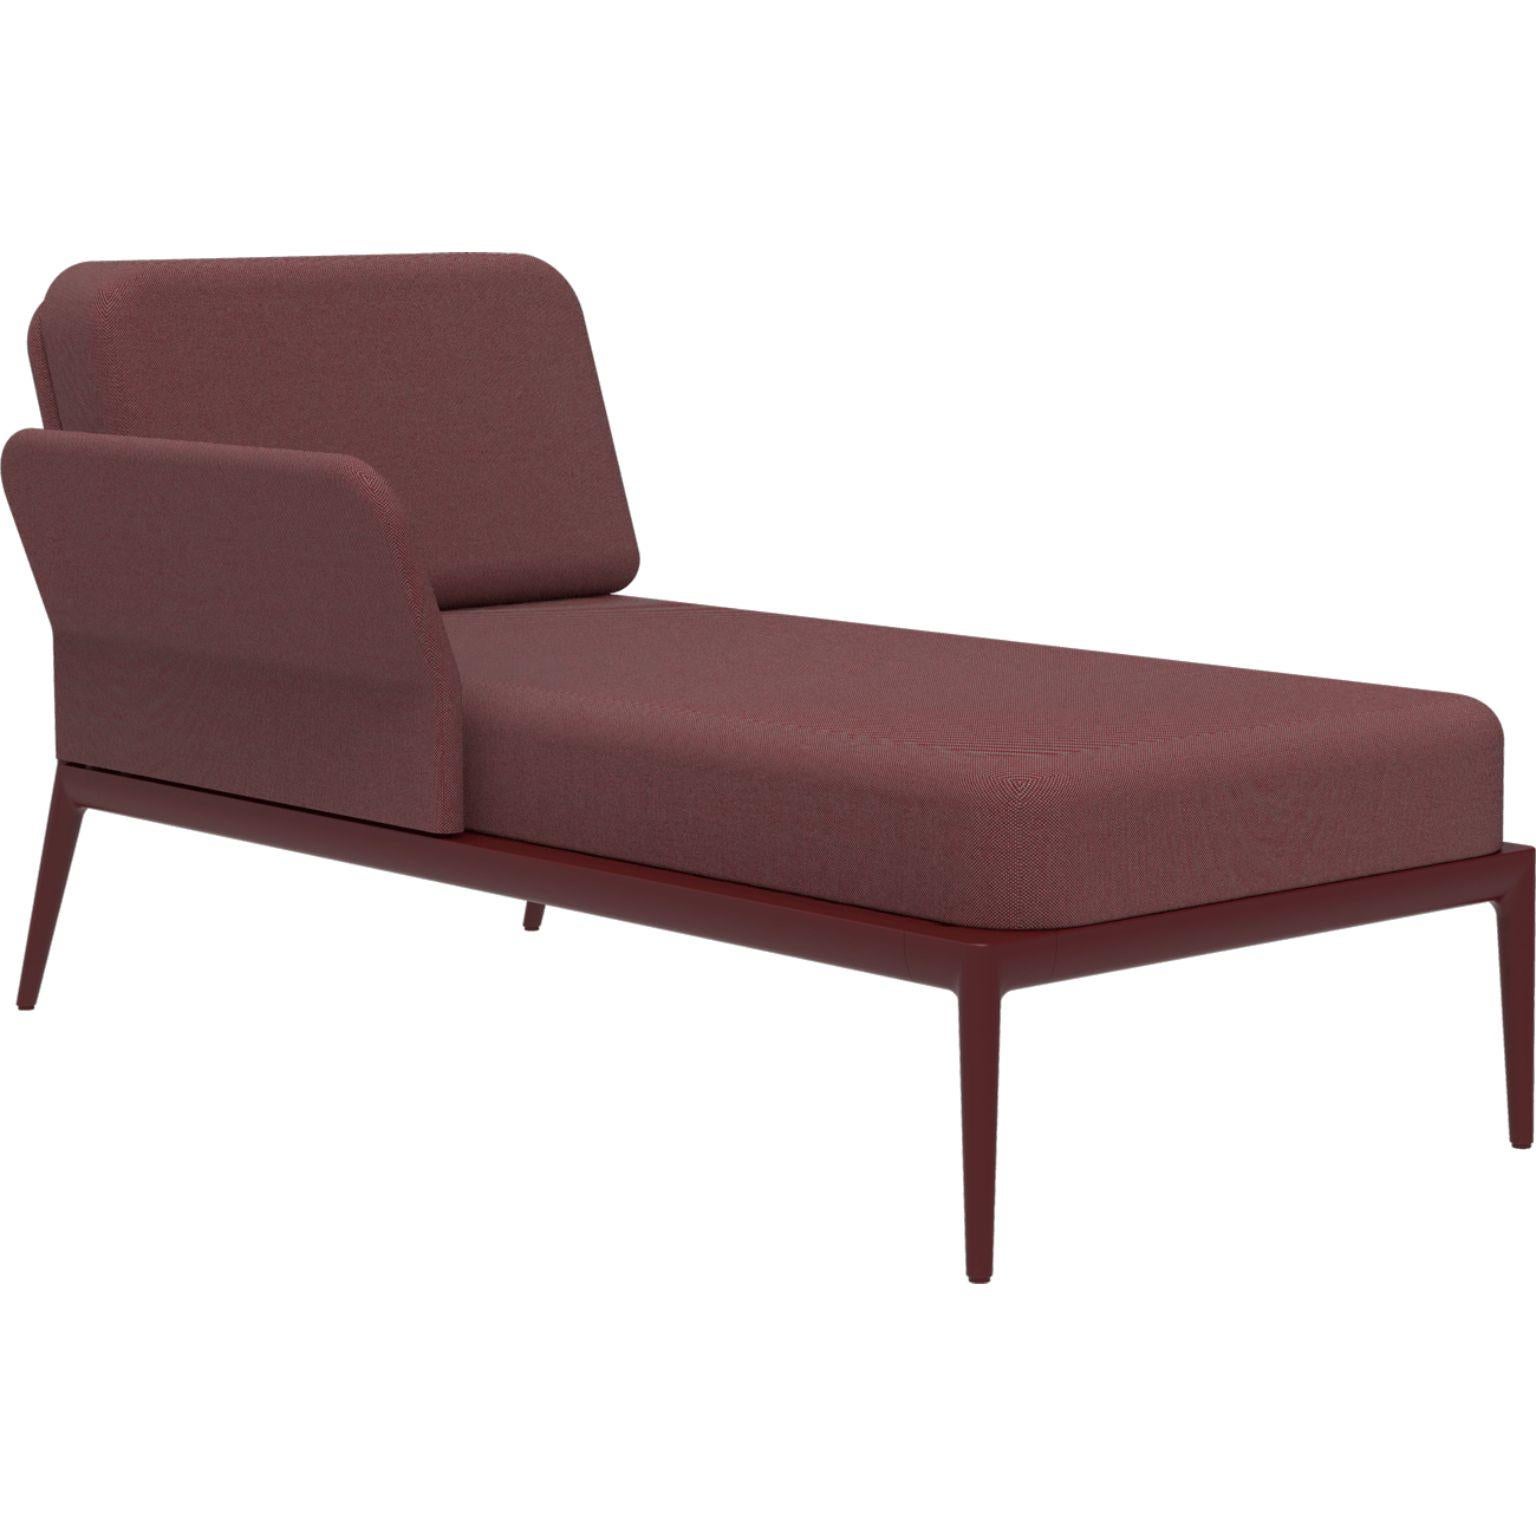 Cover Burgundy Right Chaise Longue by MOWEE
Dimensions: D 80 x W 155 x H 81 cm (seat height 42 cm).
Material: Aluminum and upholstery.
Weight: 28 kg.
Also available in different colors and finishes. Please contact us.

An unmistakable